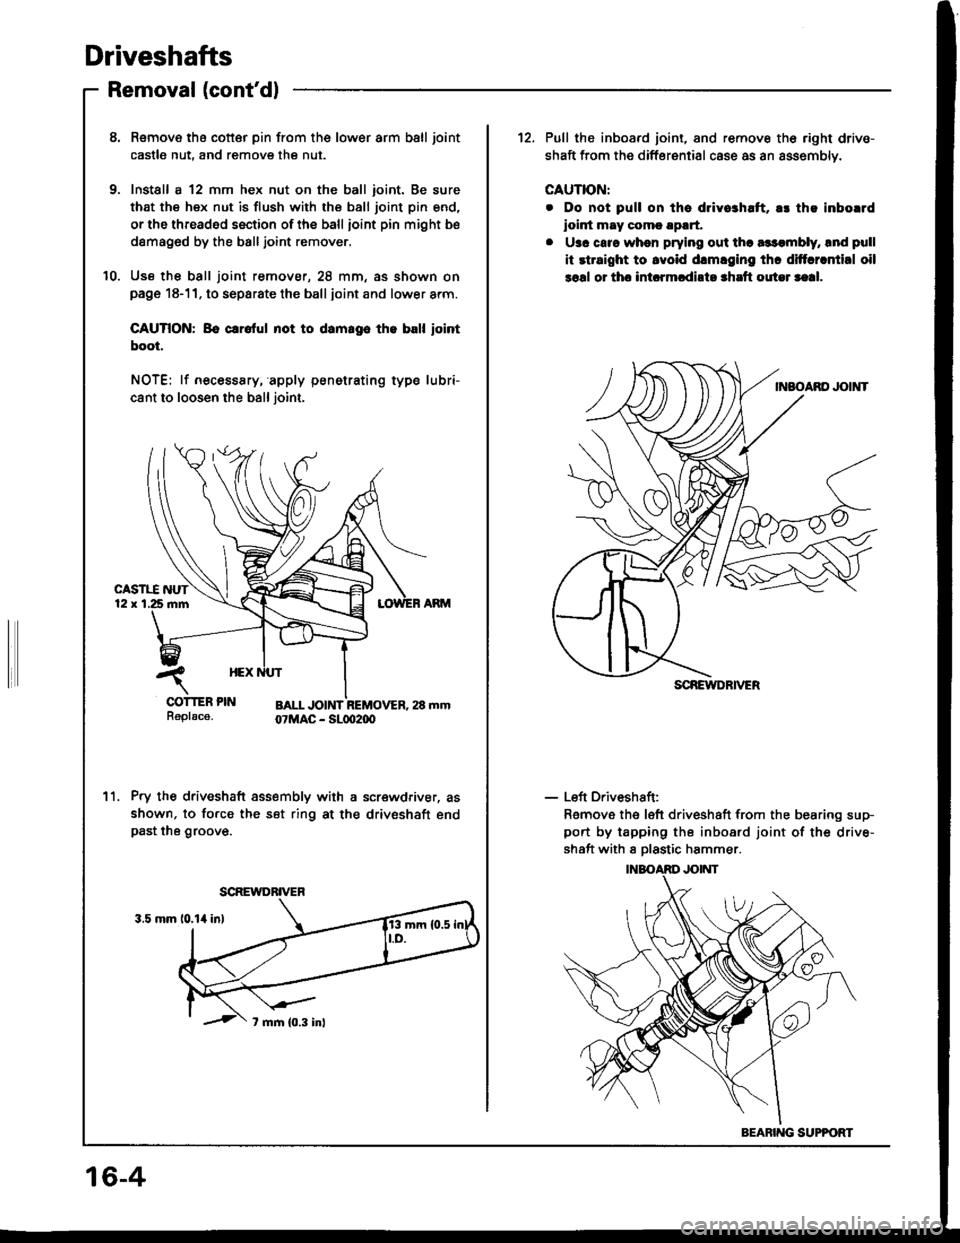 HONDA INTEGRA 1994 4.G Workshop Manual Driveshafts
Removal (contdl
8. Remove tha cotter pin from the lower arm ball joint
castle nut, and remove the nut.
9. Install a 12 mm hex nut on the ball ioint. Be sure
that the hex nut is flush with